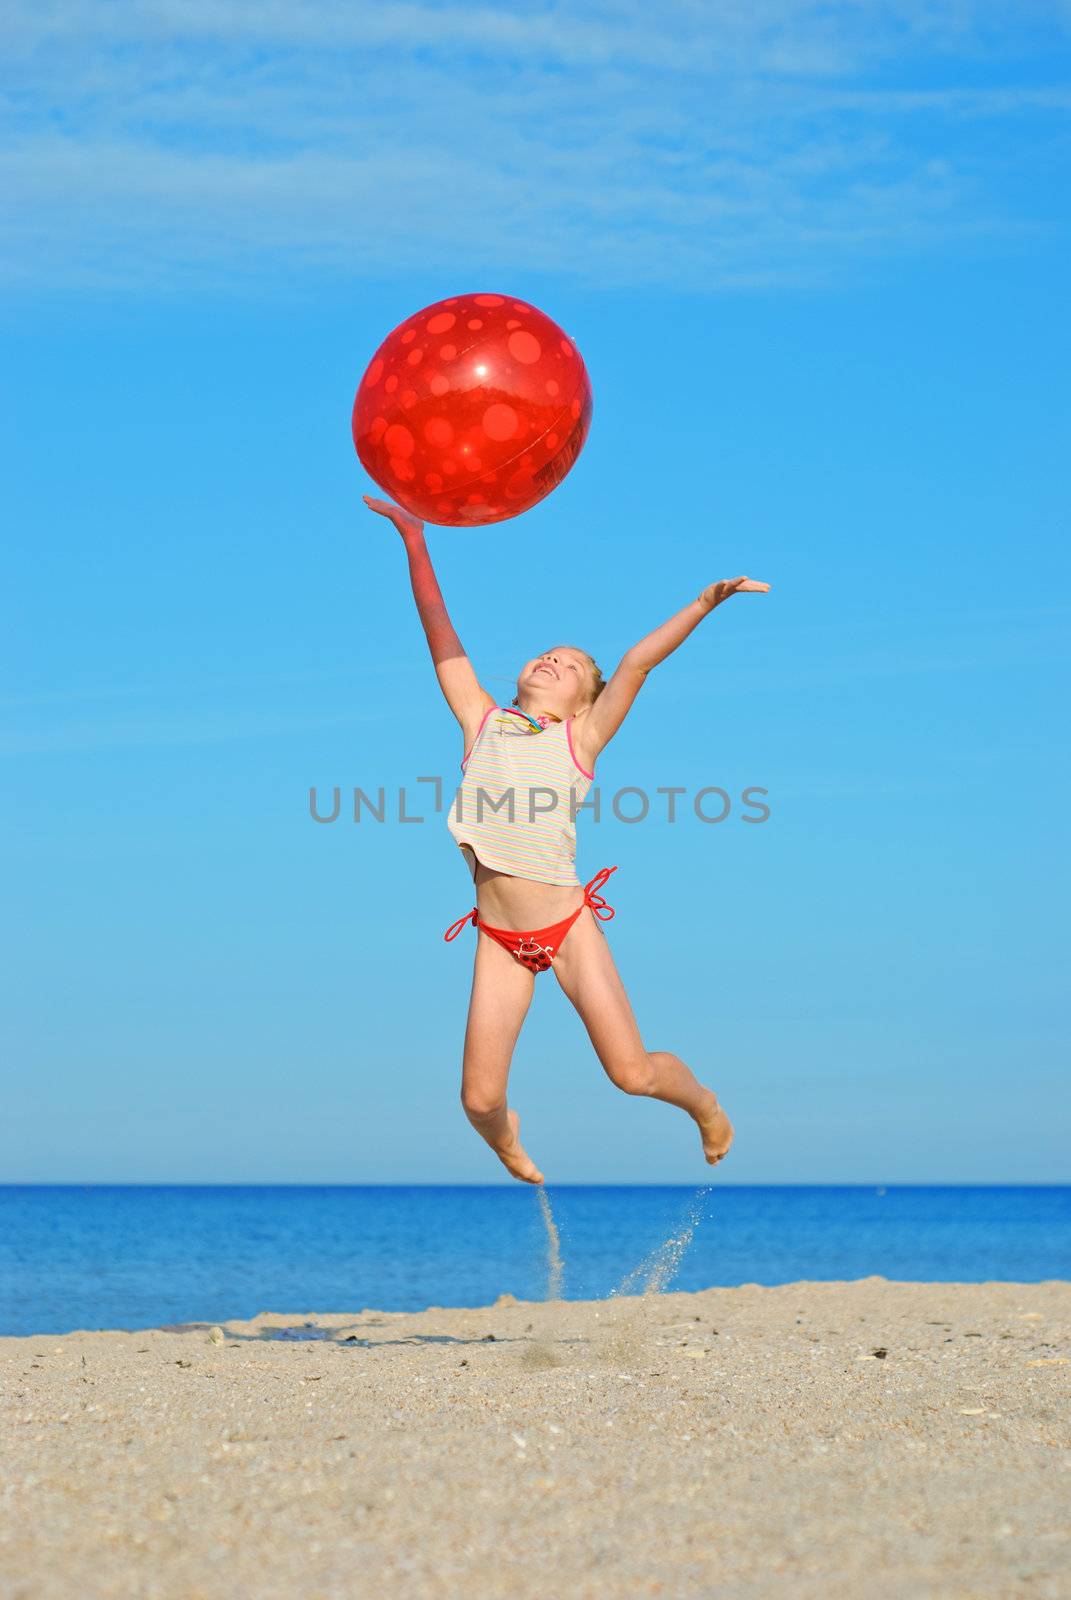 Jumping little girl with red ball on the beach